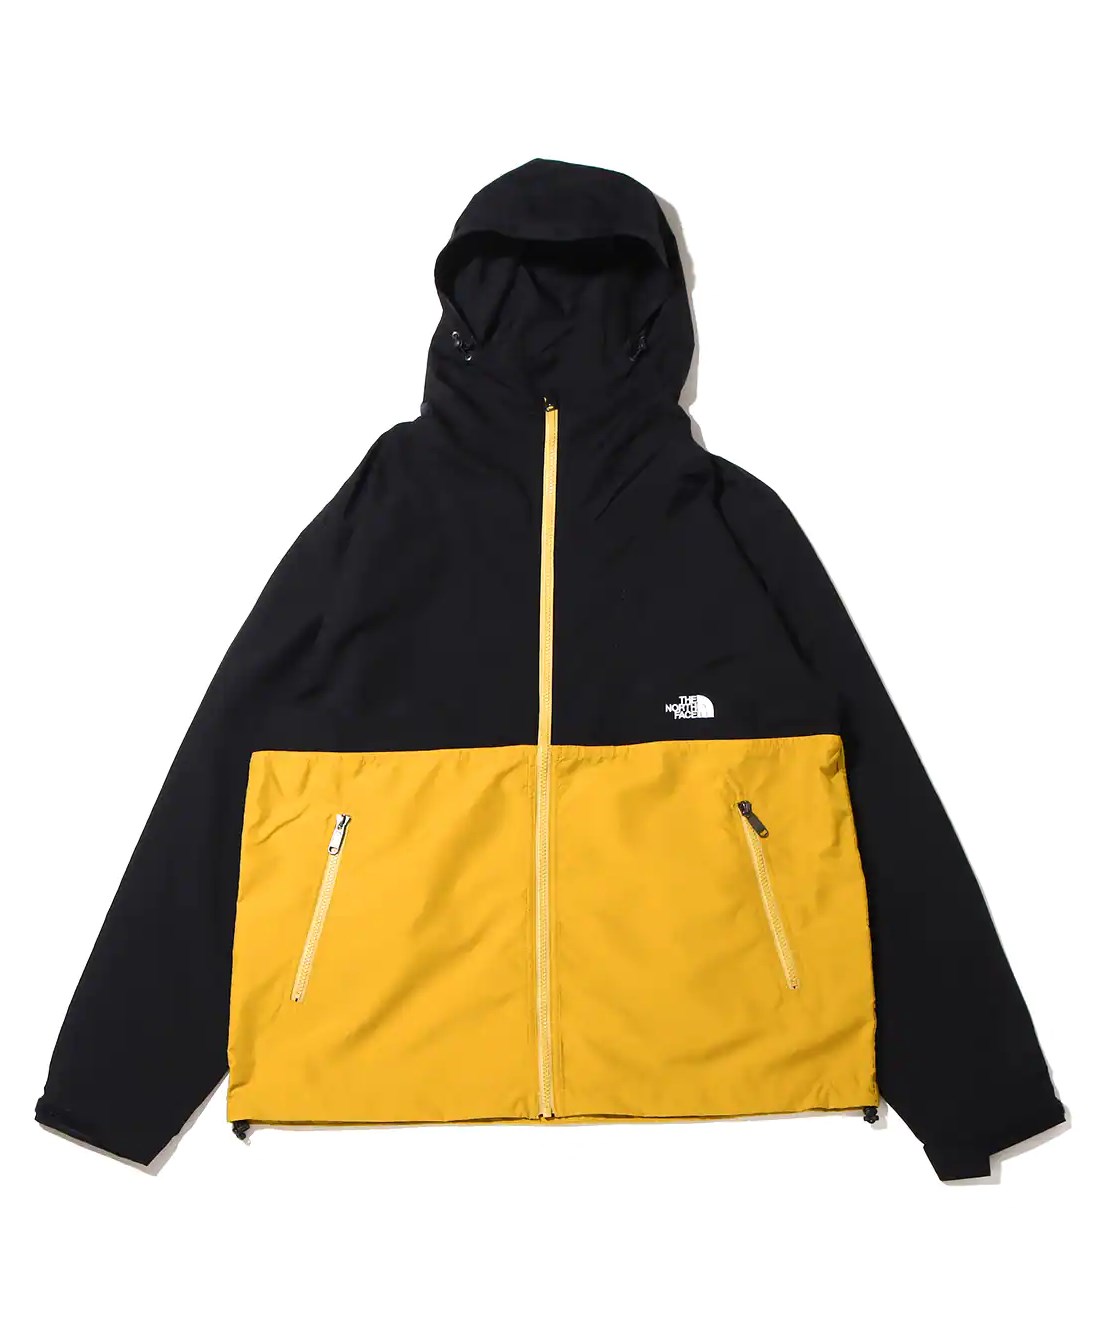 THE NORTH FACE(THE NORTH FACE) |ザ・ノース・フェイス コンパクト 